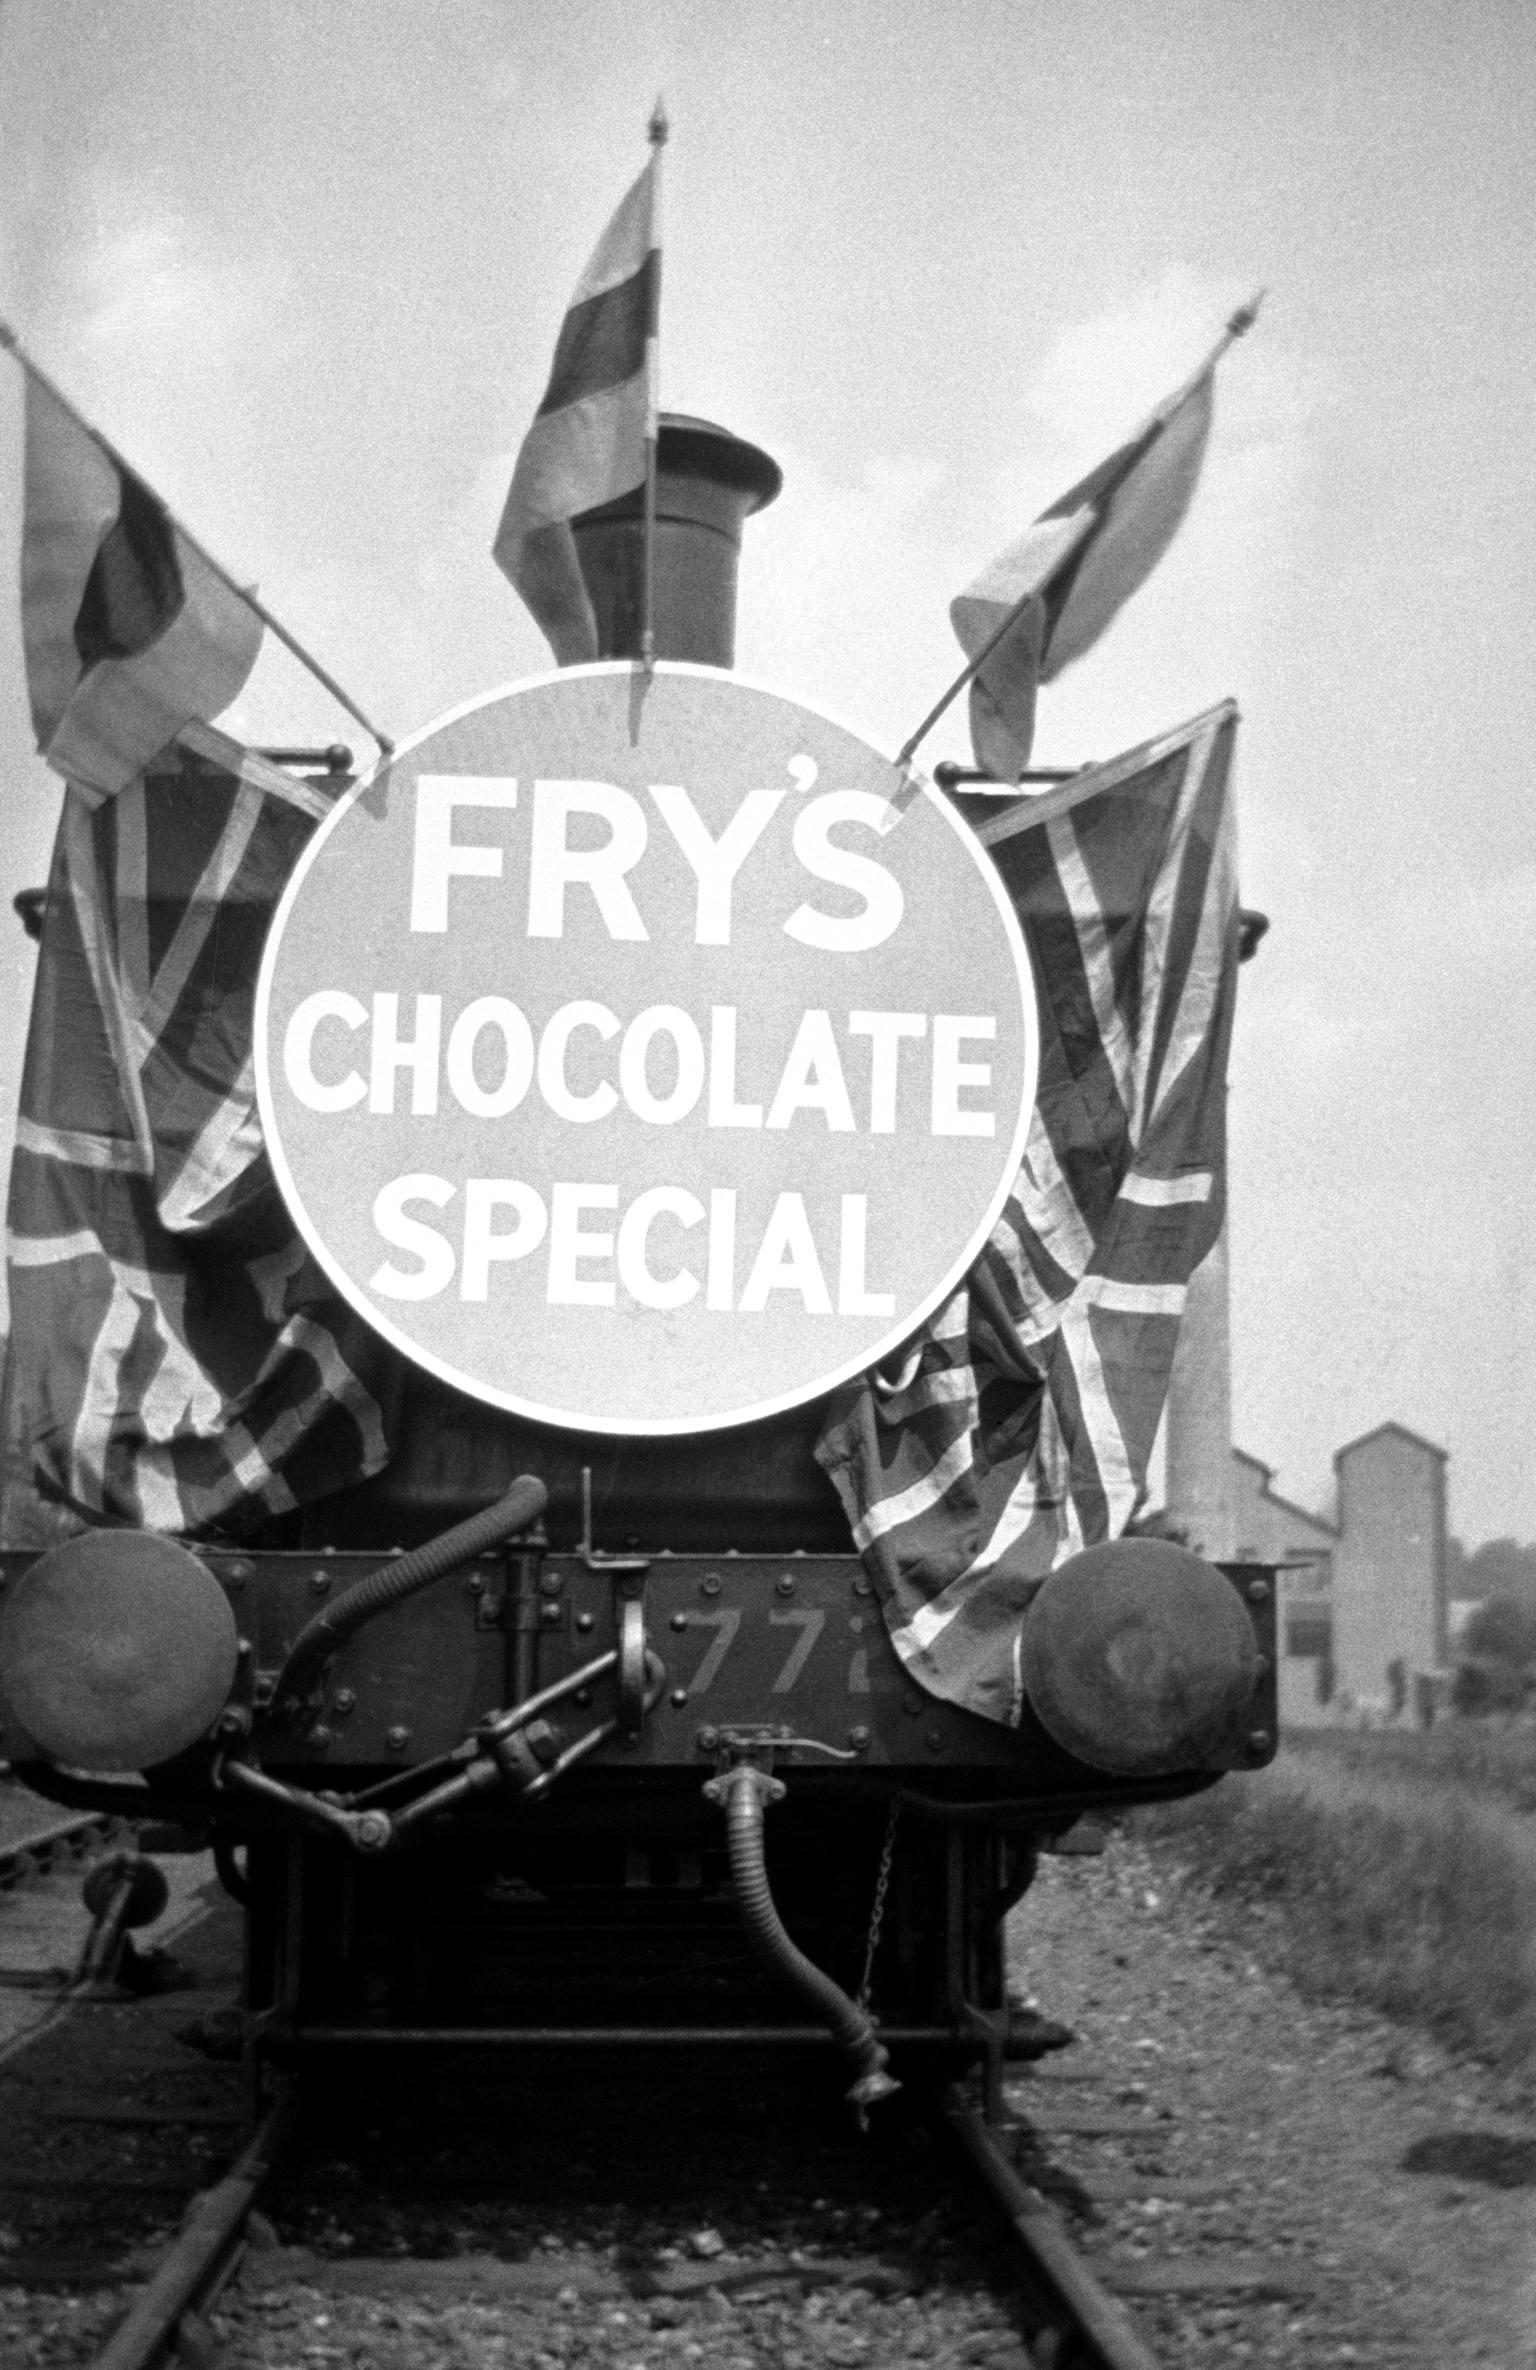 Fry's chocolate special show train, negative